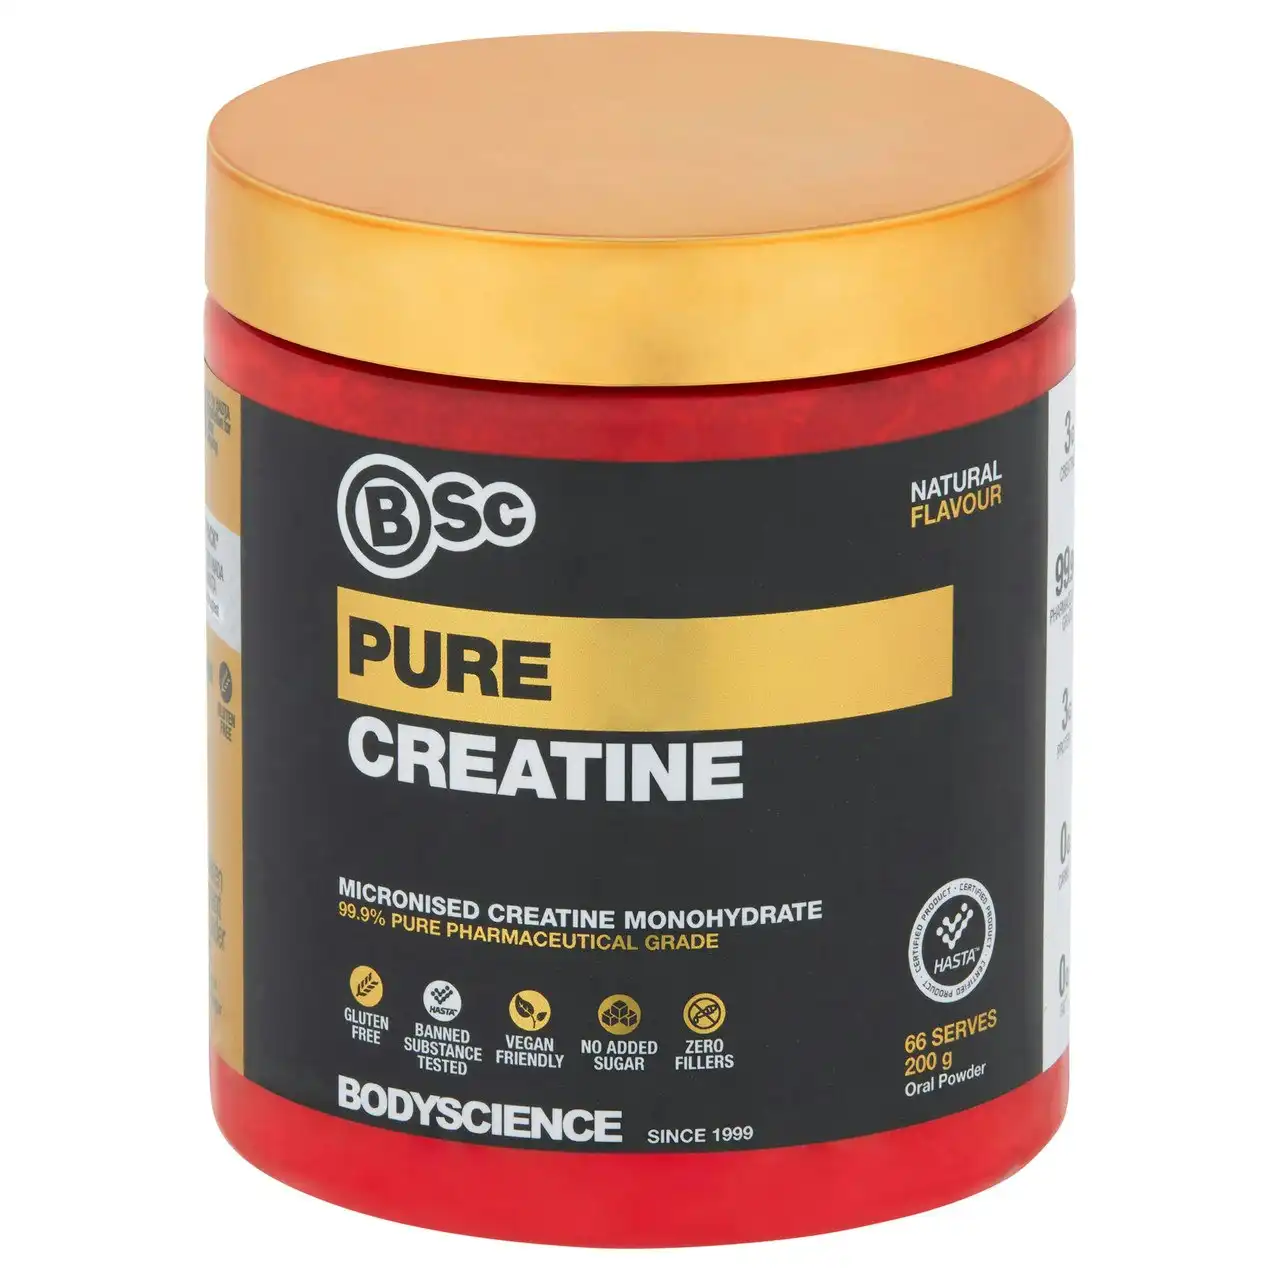 BSc Pure Creatine Natural Flavour 200g